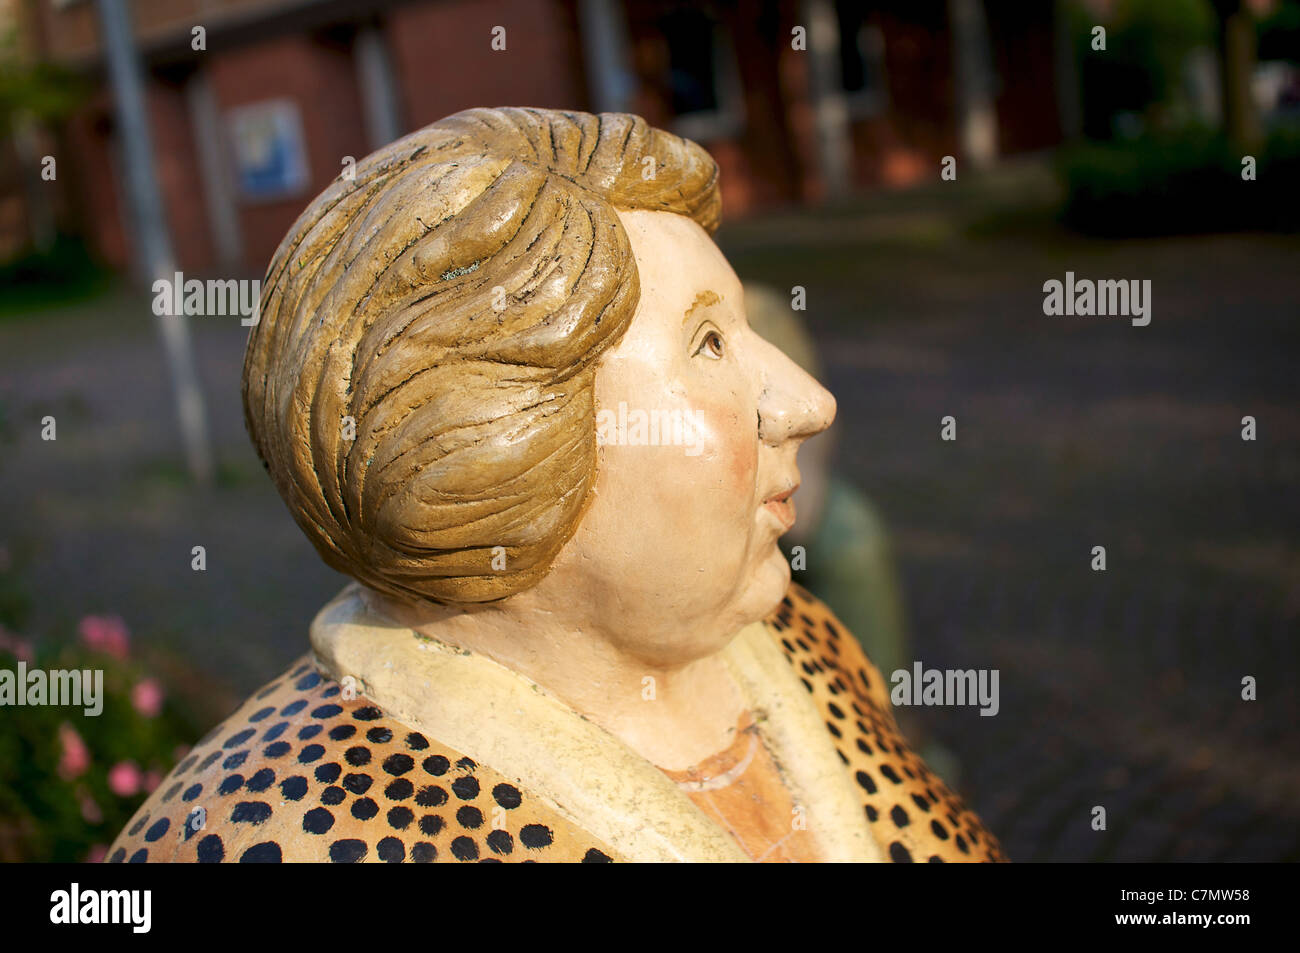 'Frau Peters' , one of the many Lechner figures in the center of Petershagen. Created by the artist Christel Lechner in 2002. Stock Photo